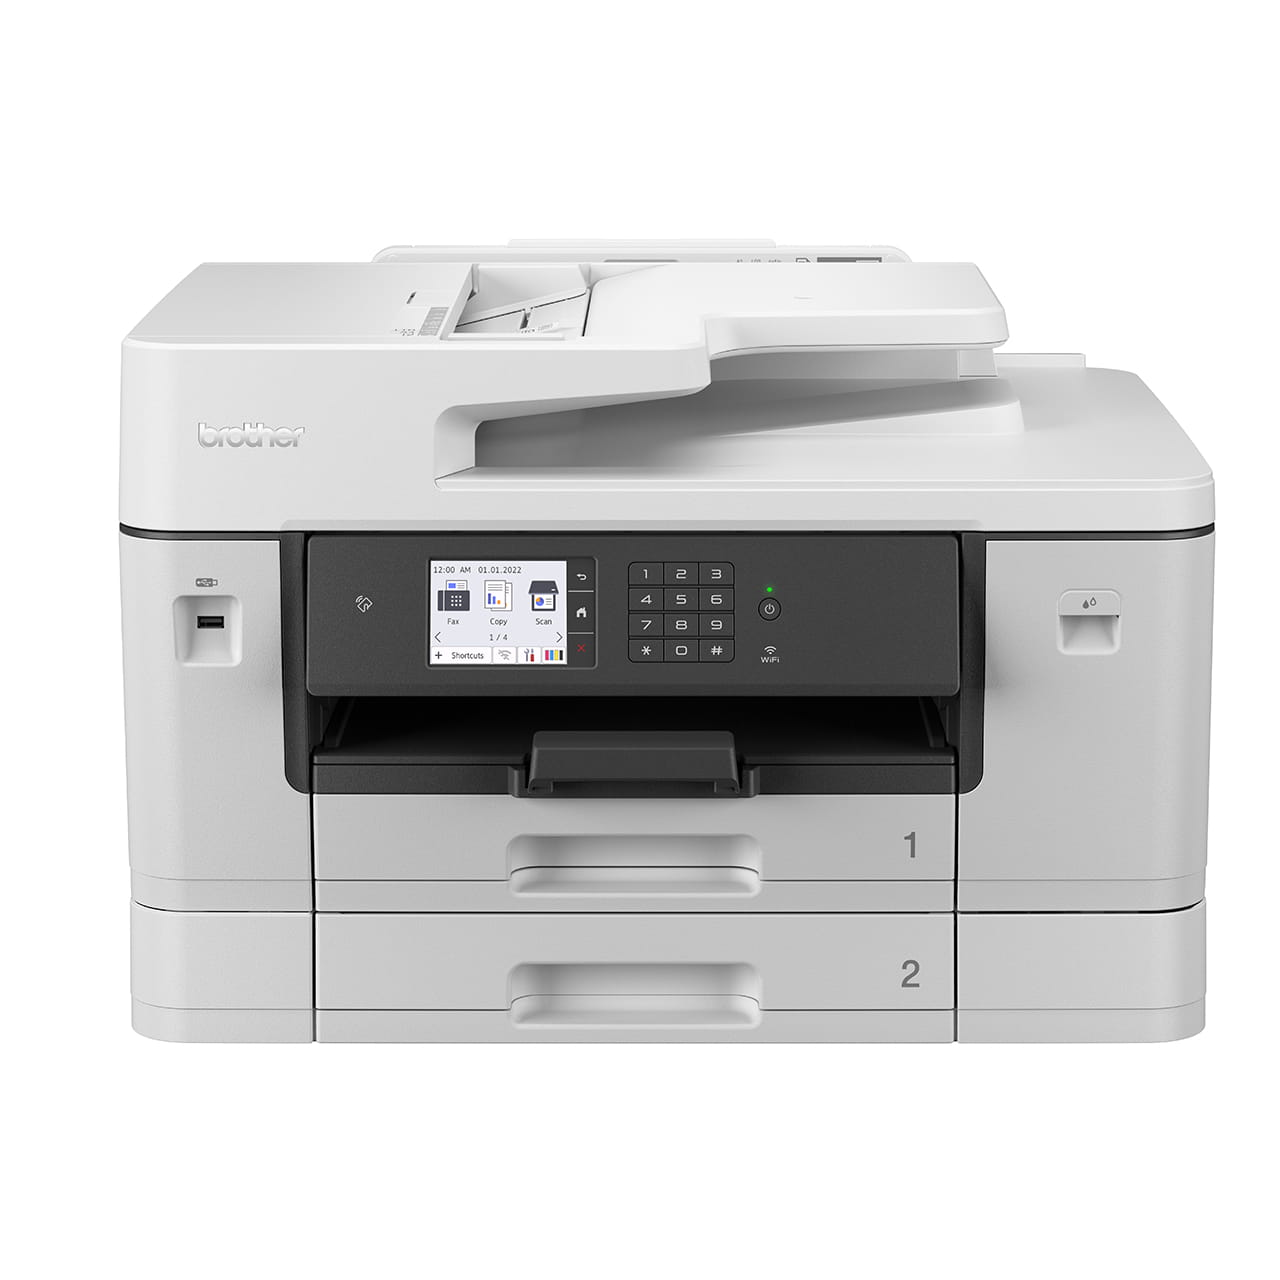 Brother MFC-J3940DW Inkjet Printer Front View